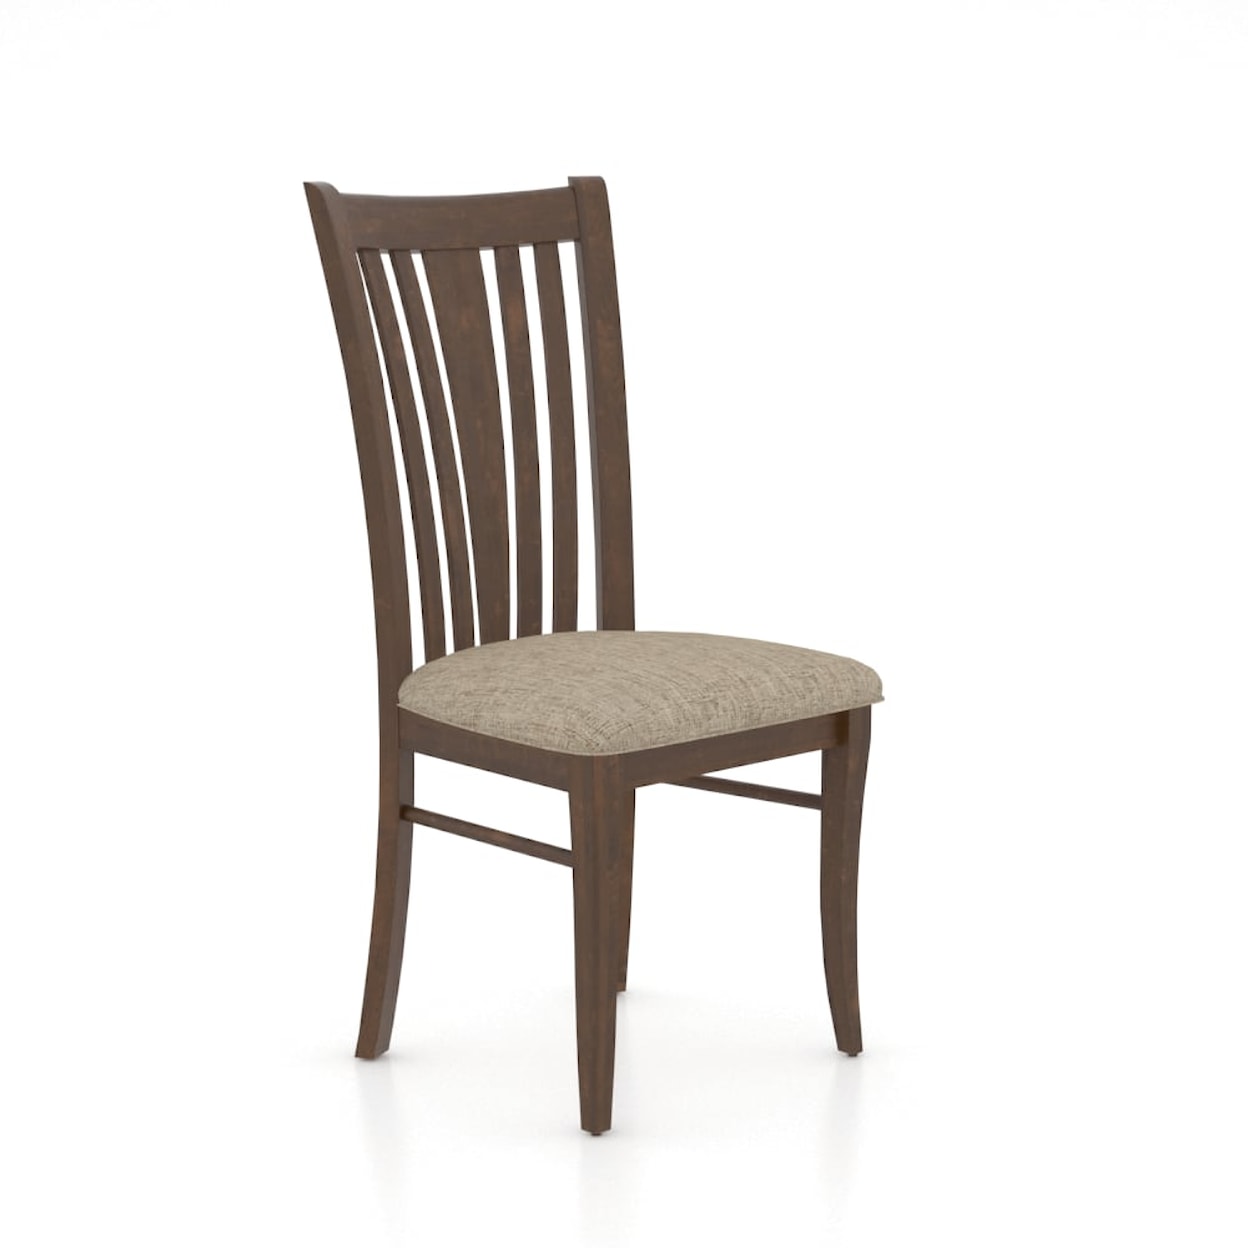 Canadel Canadel Side Chair